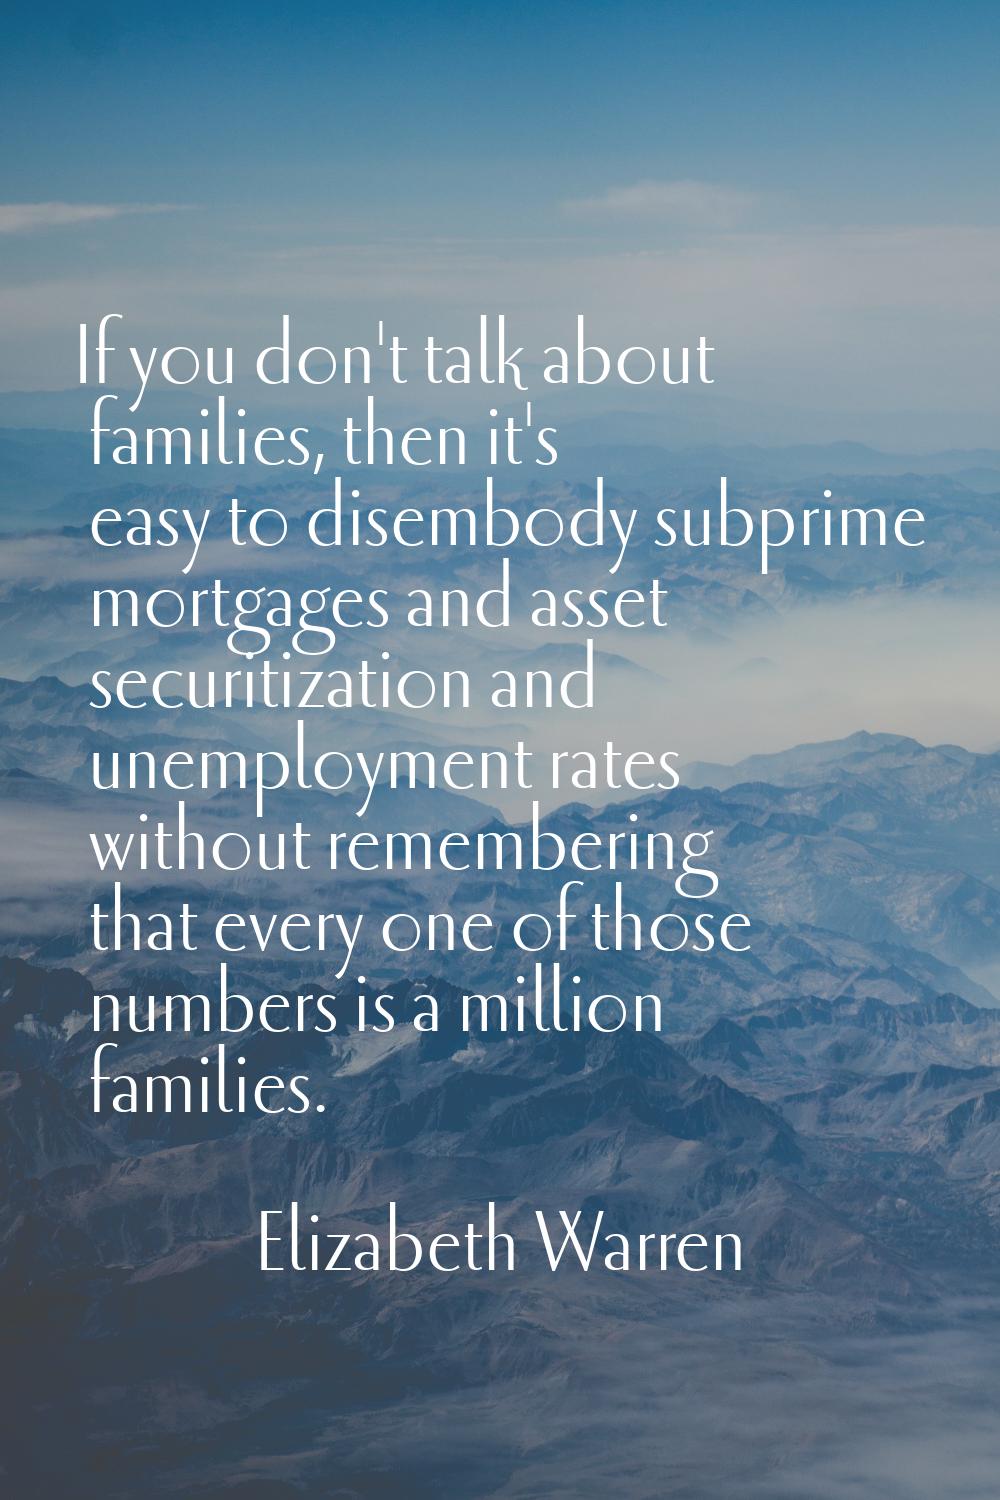 If you don't talk about families, then it's easy to disembody subprime mortgages and asset securiti